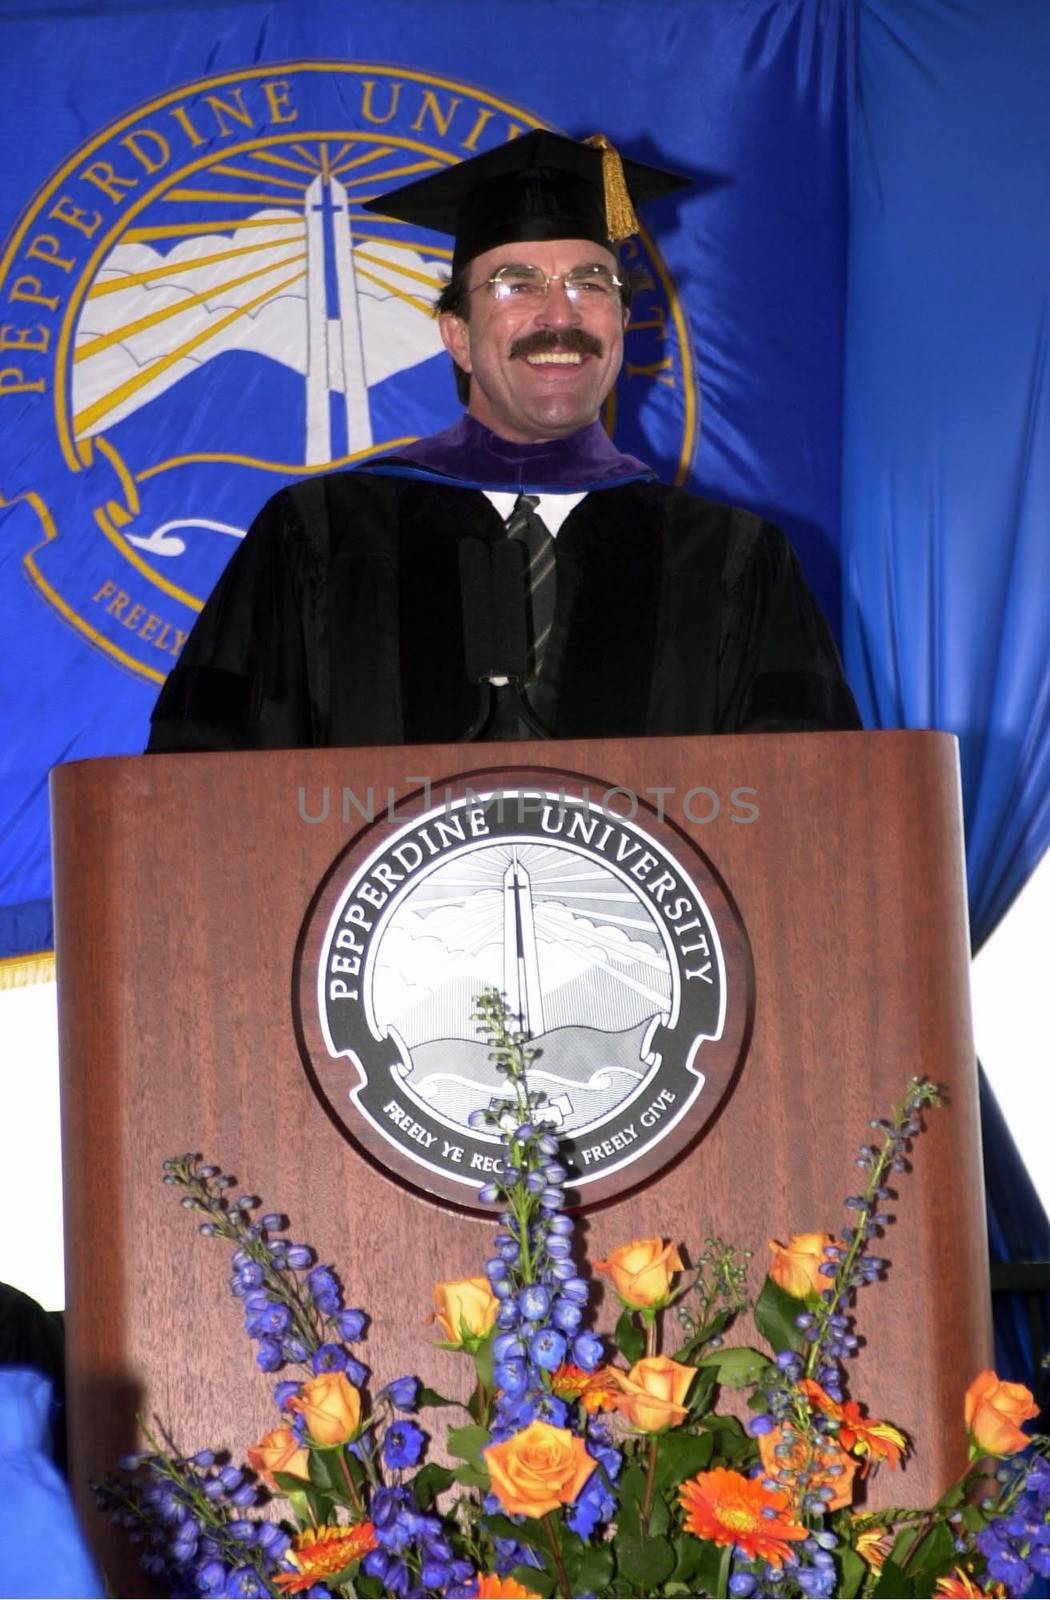 Tom Selleck at Pepperdine University in Malibu, to receive an honorary doctorate, 04-29-00